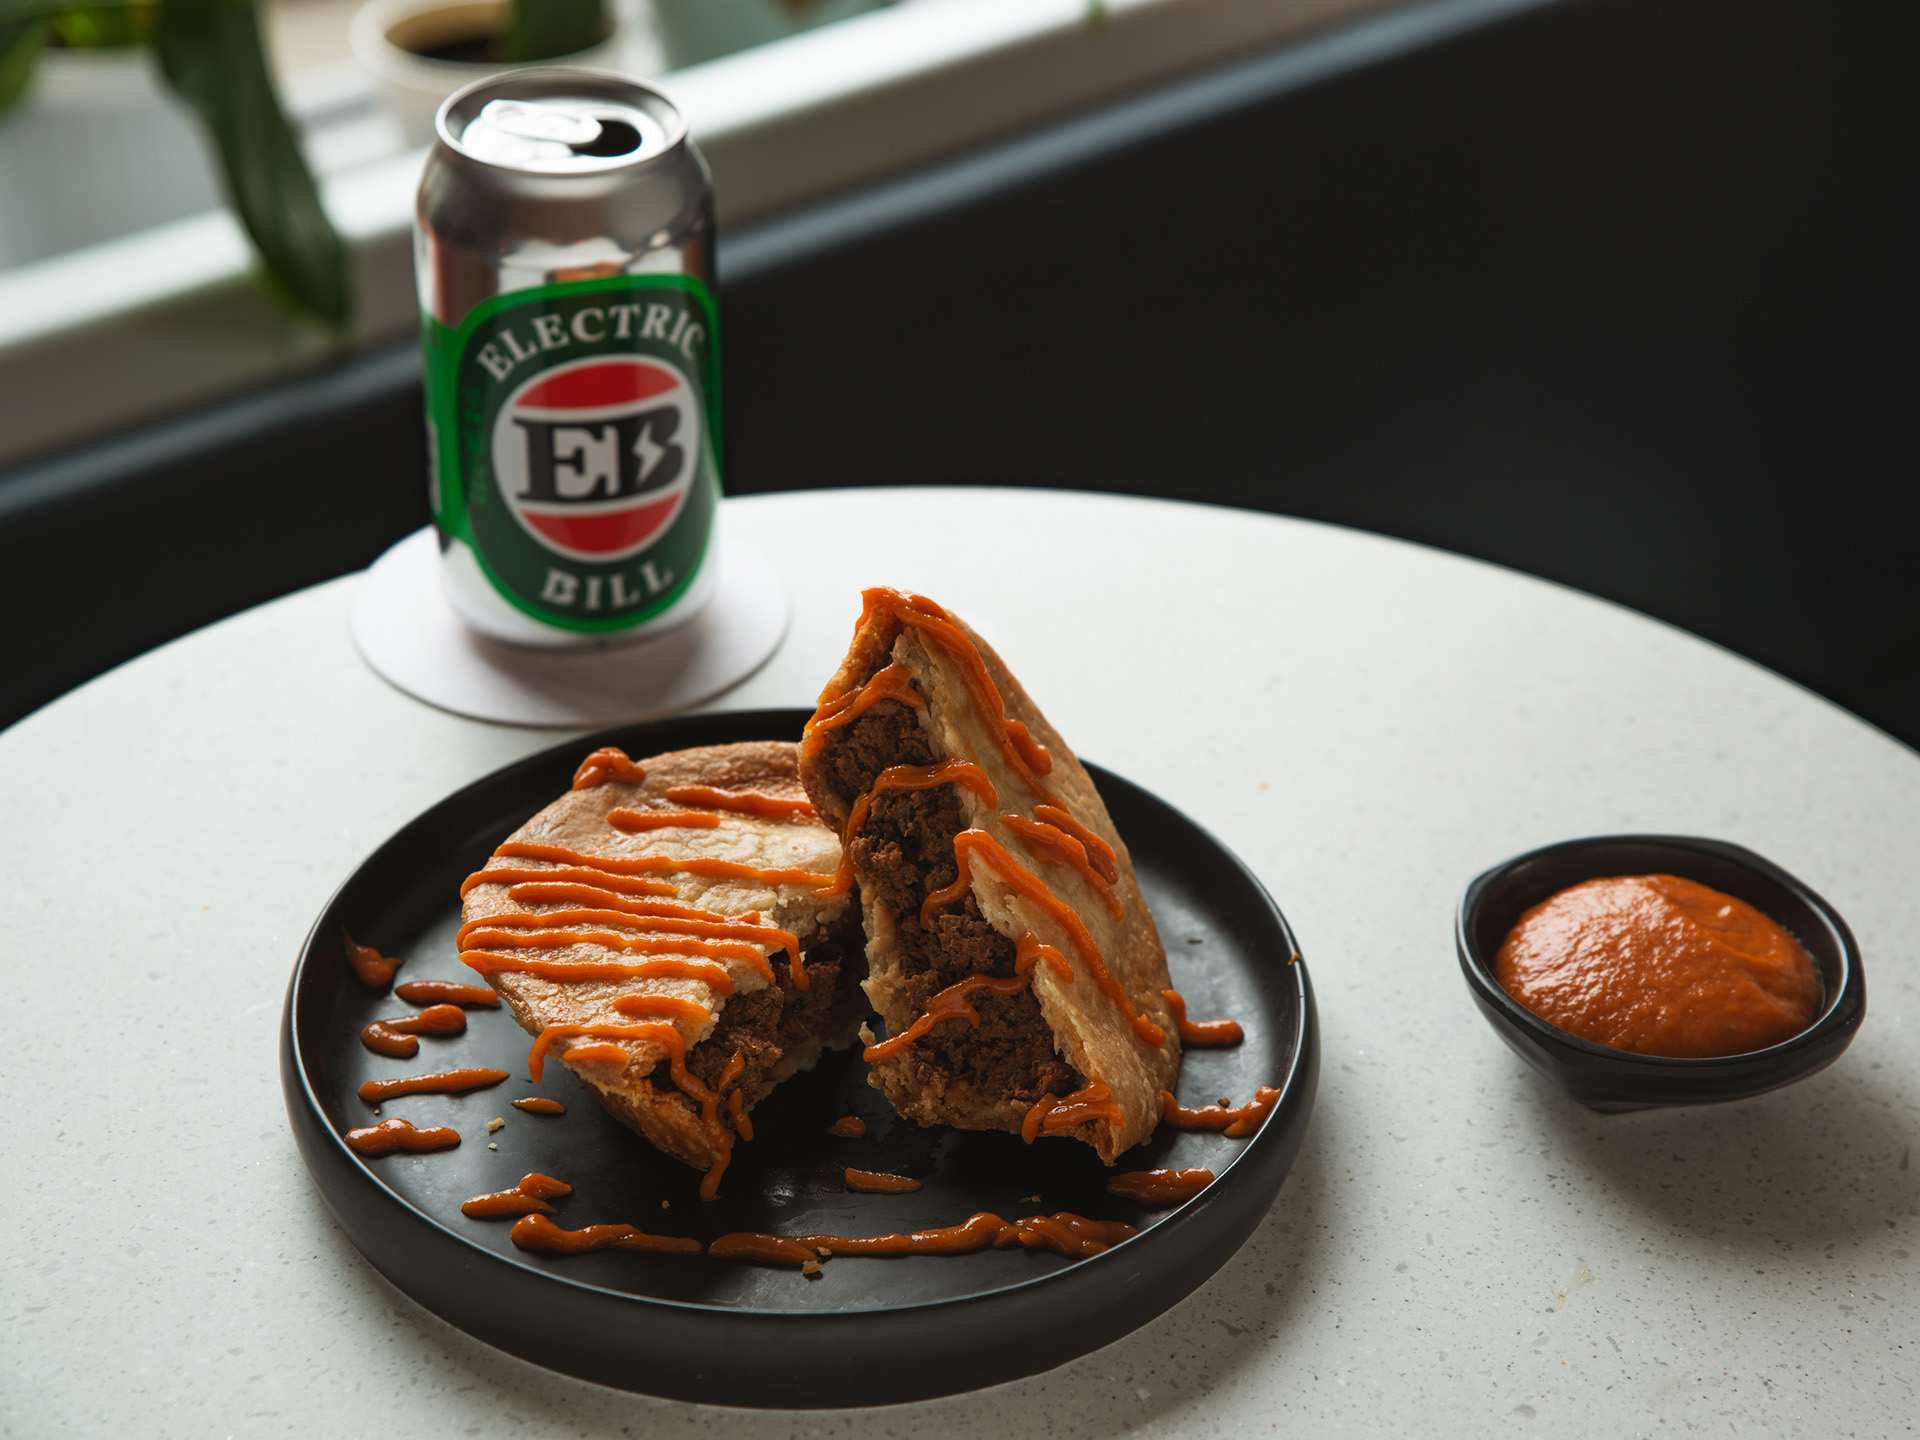 The best patios in Toronto | A meat pie at Electric Bill Bar in Toronto